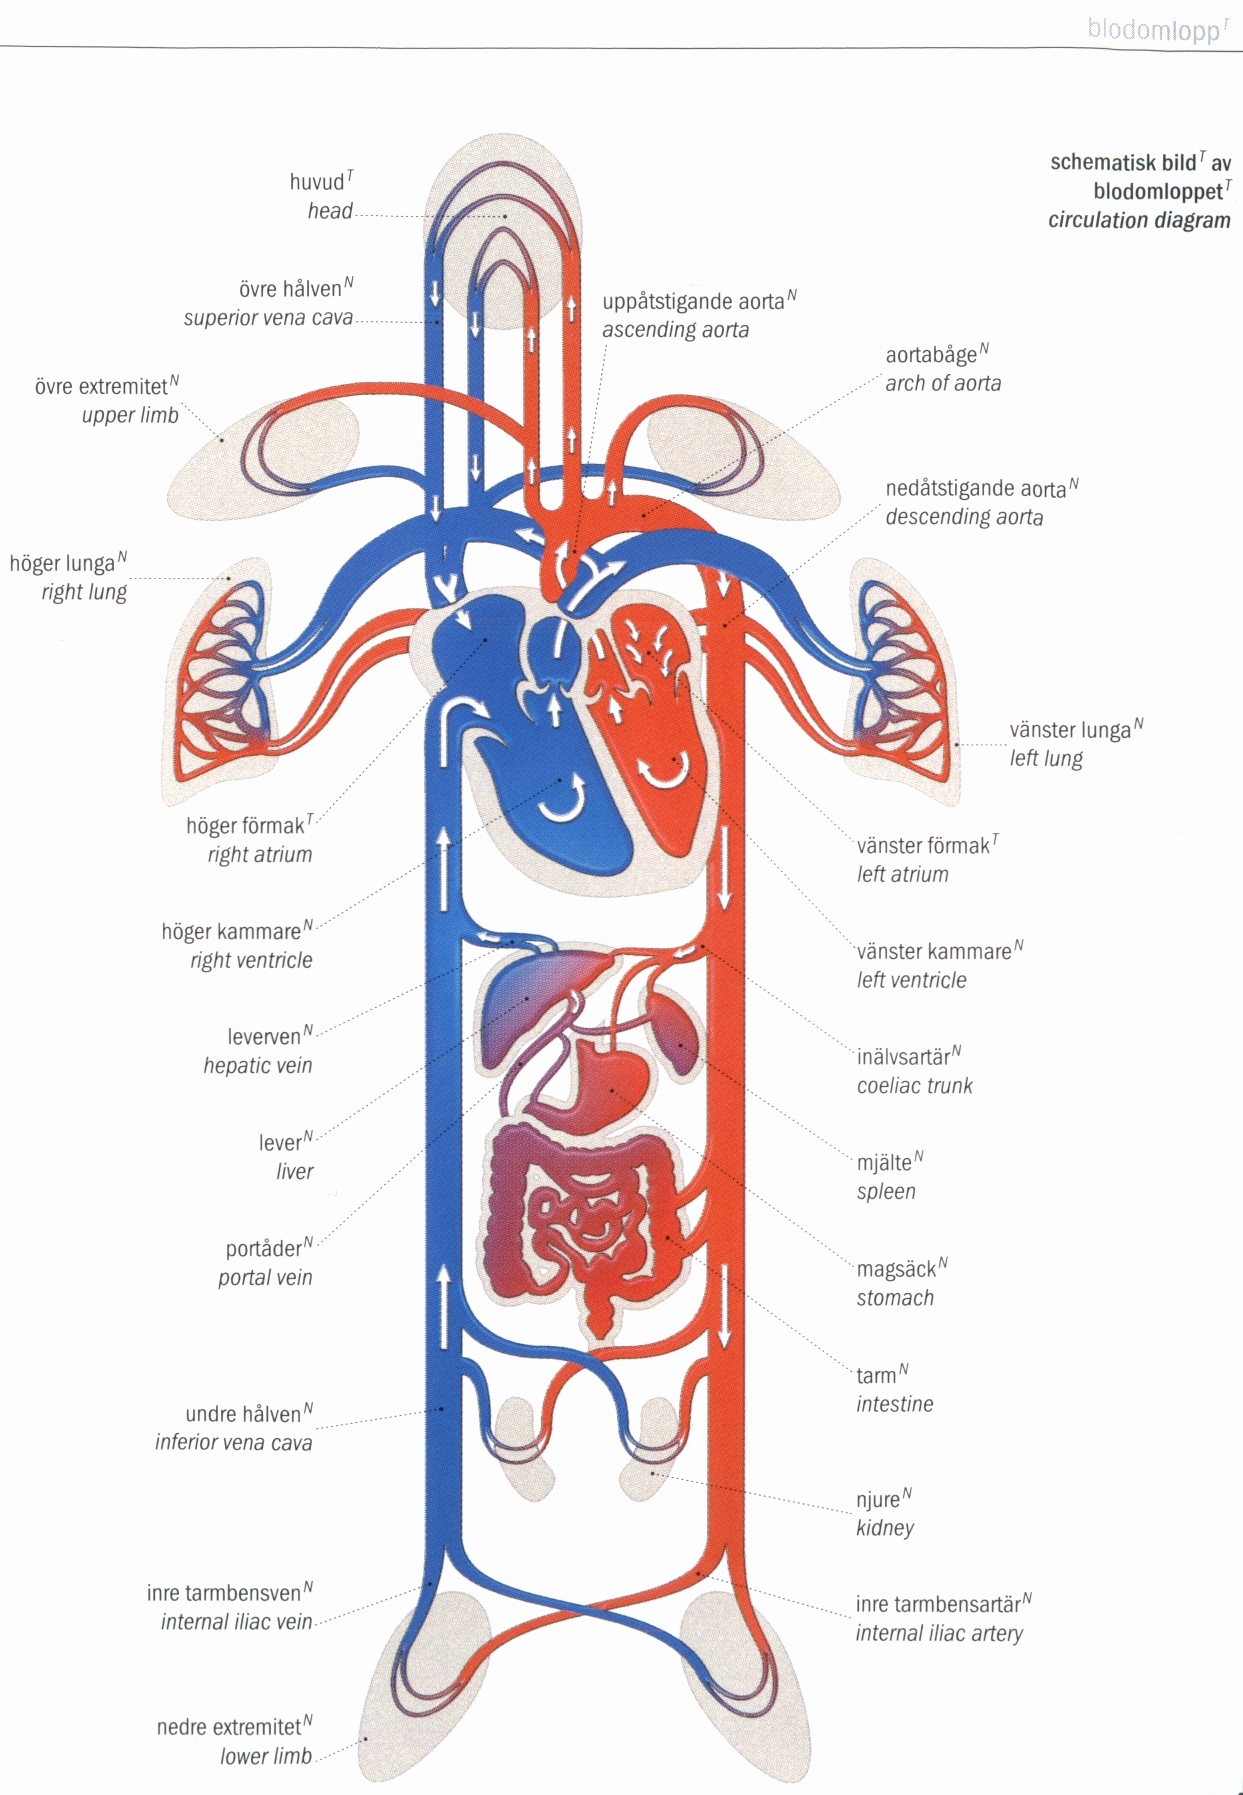 about-circulatory-system-worksheets-as-well-as-worksheet-on-place-value-for-grade-5-as-well-as